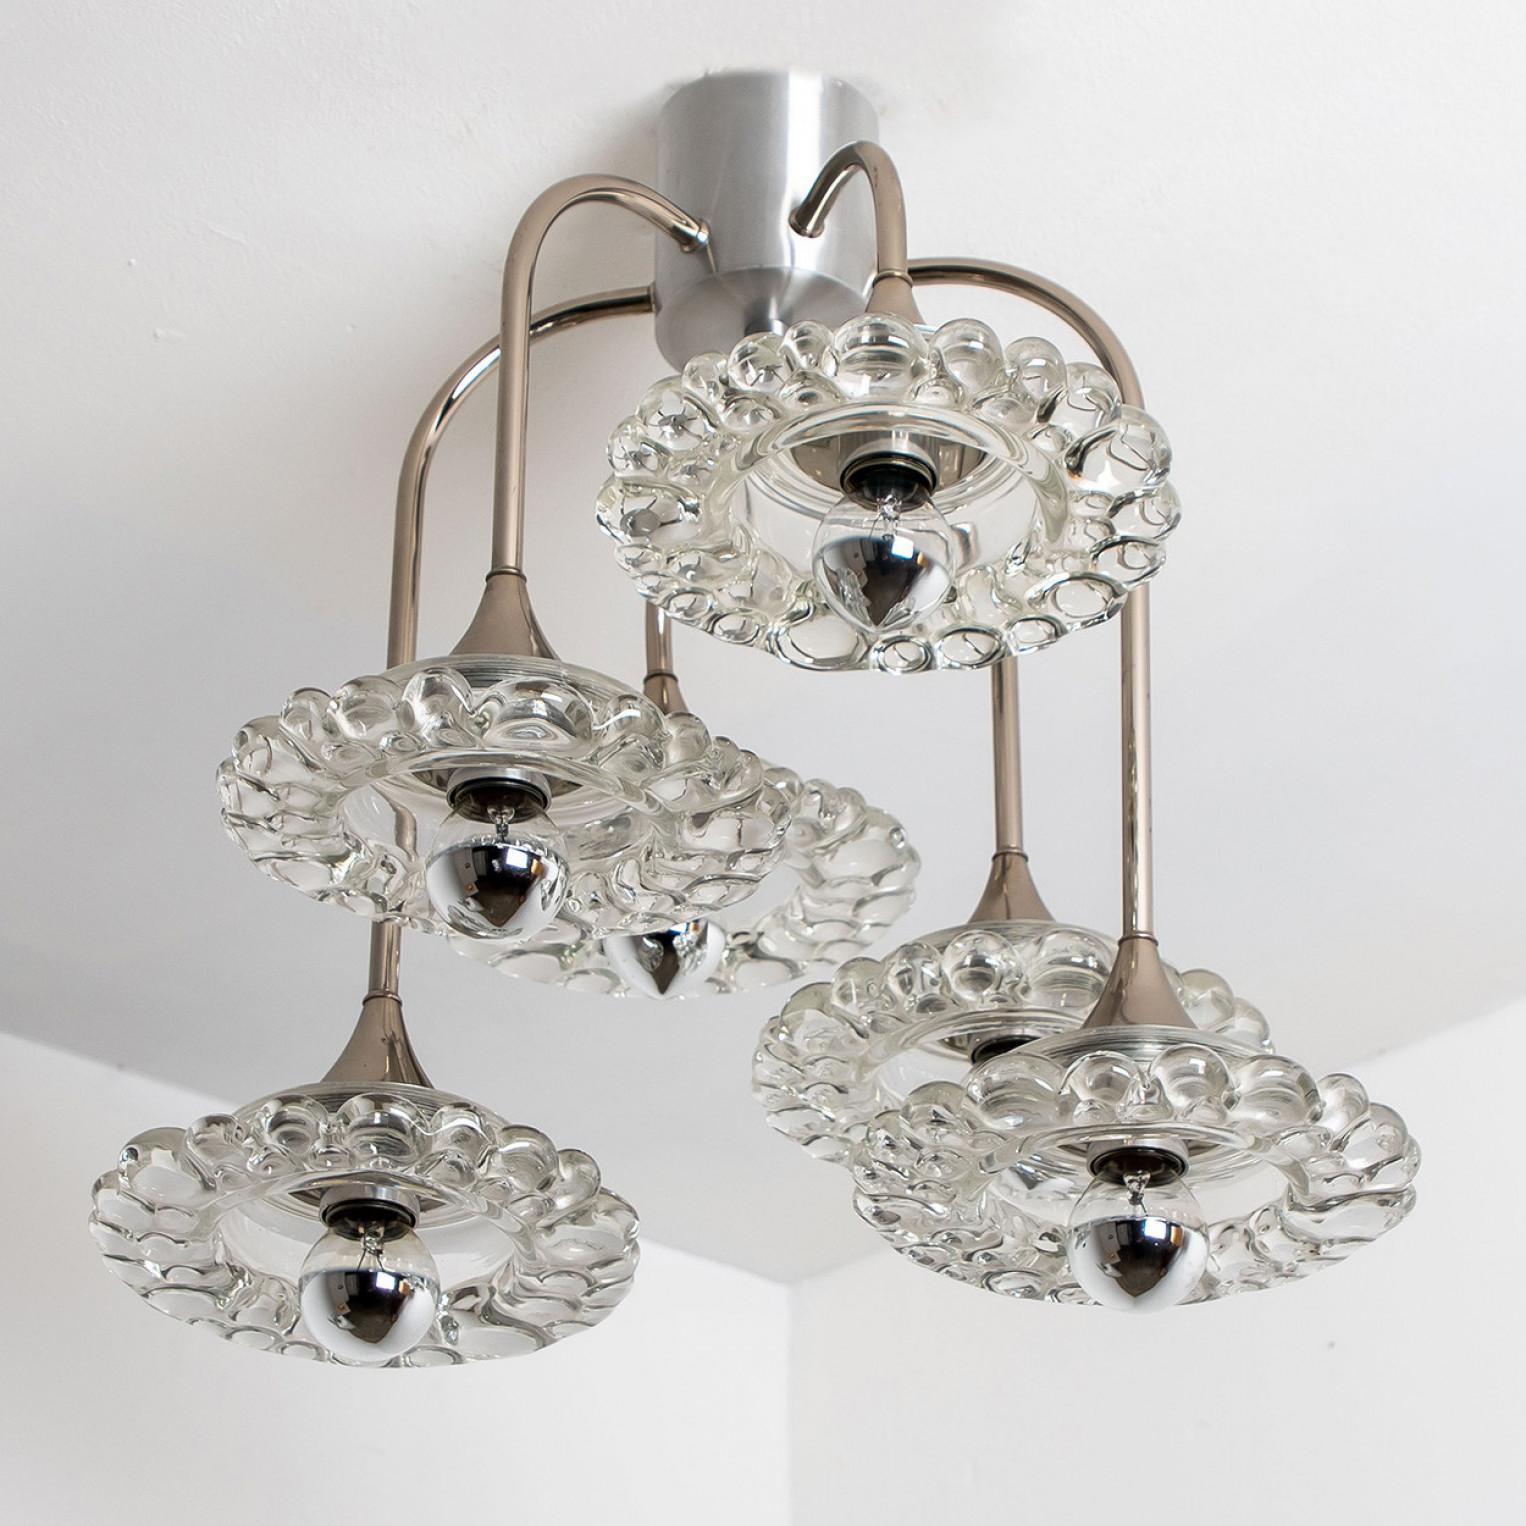 German Glass and Chrome Chandelier by Hillebrand, 1960s For Sale